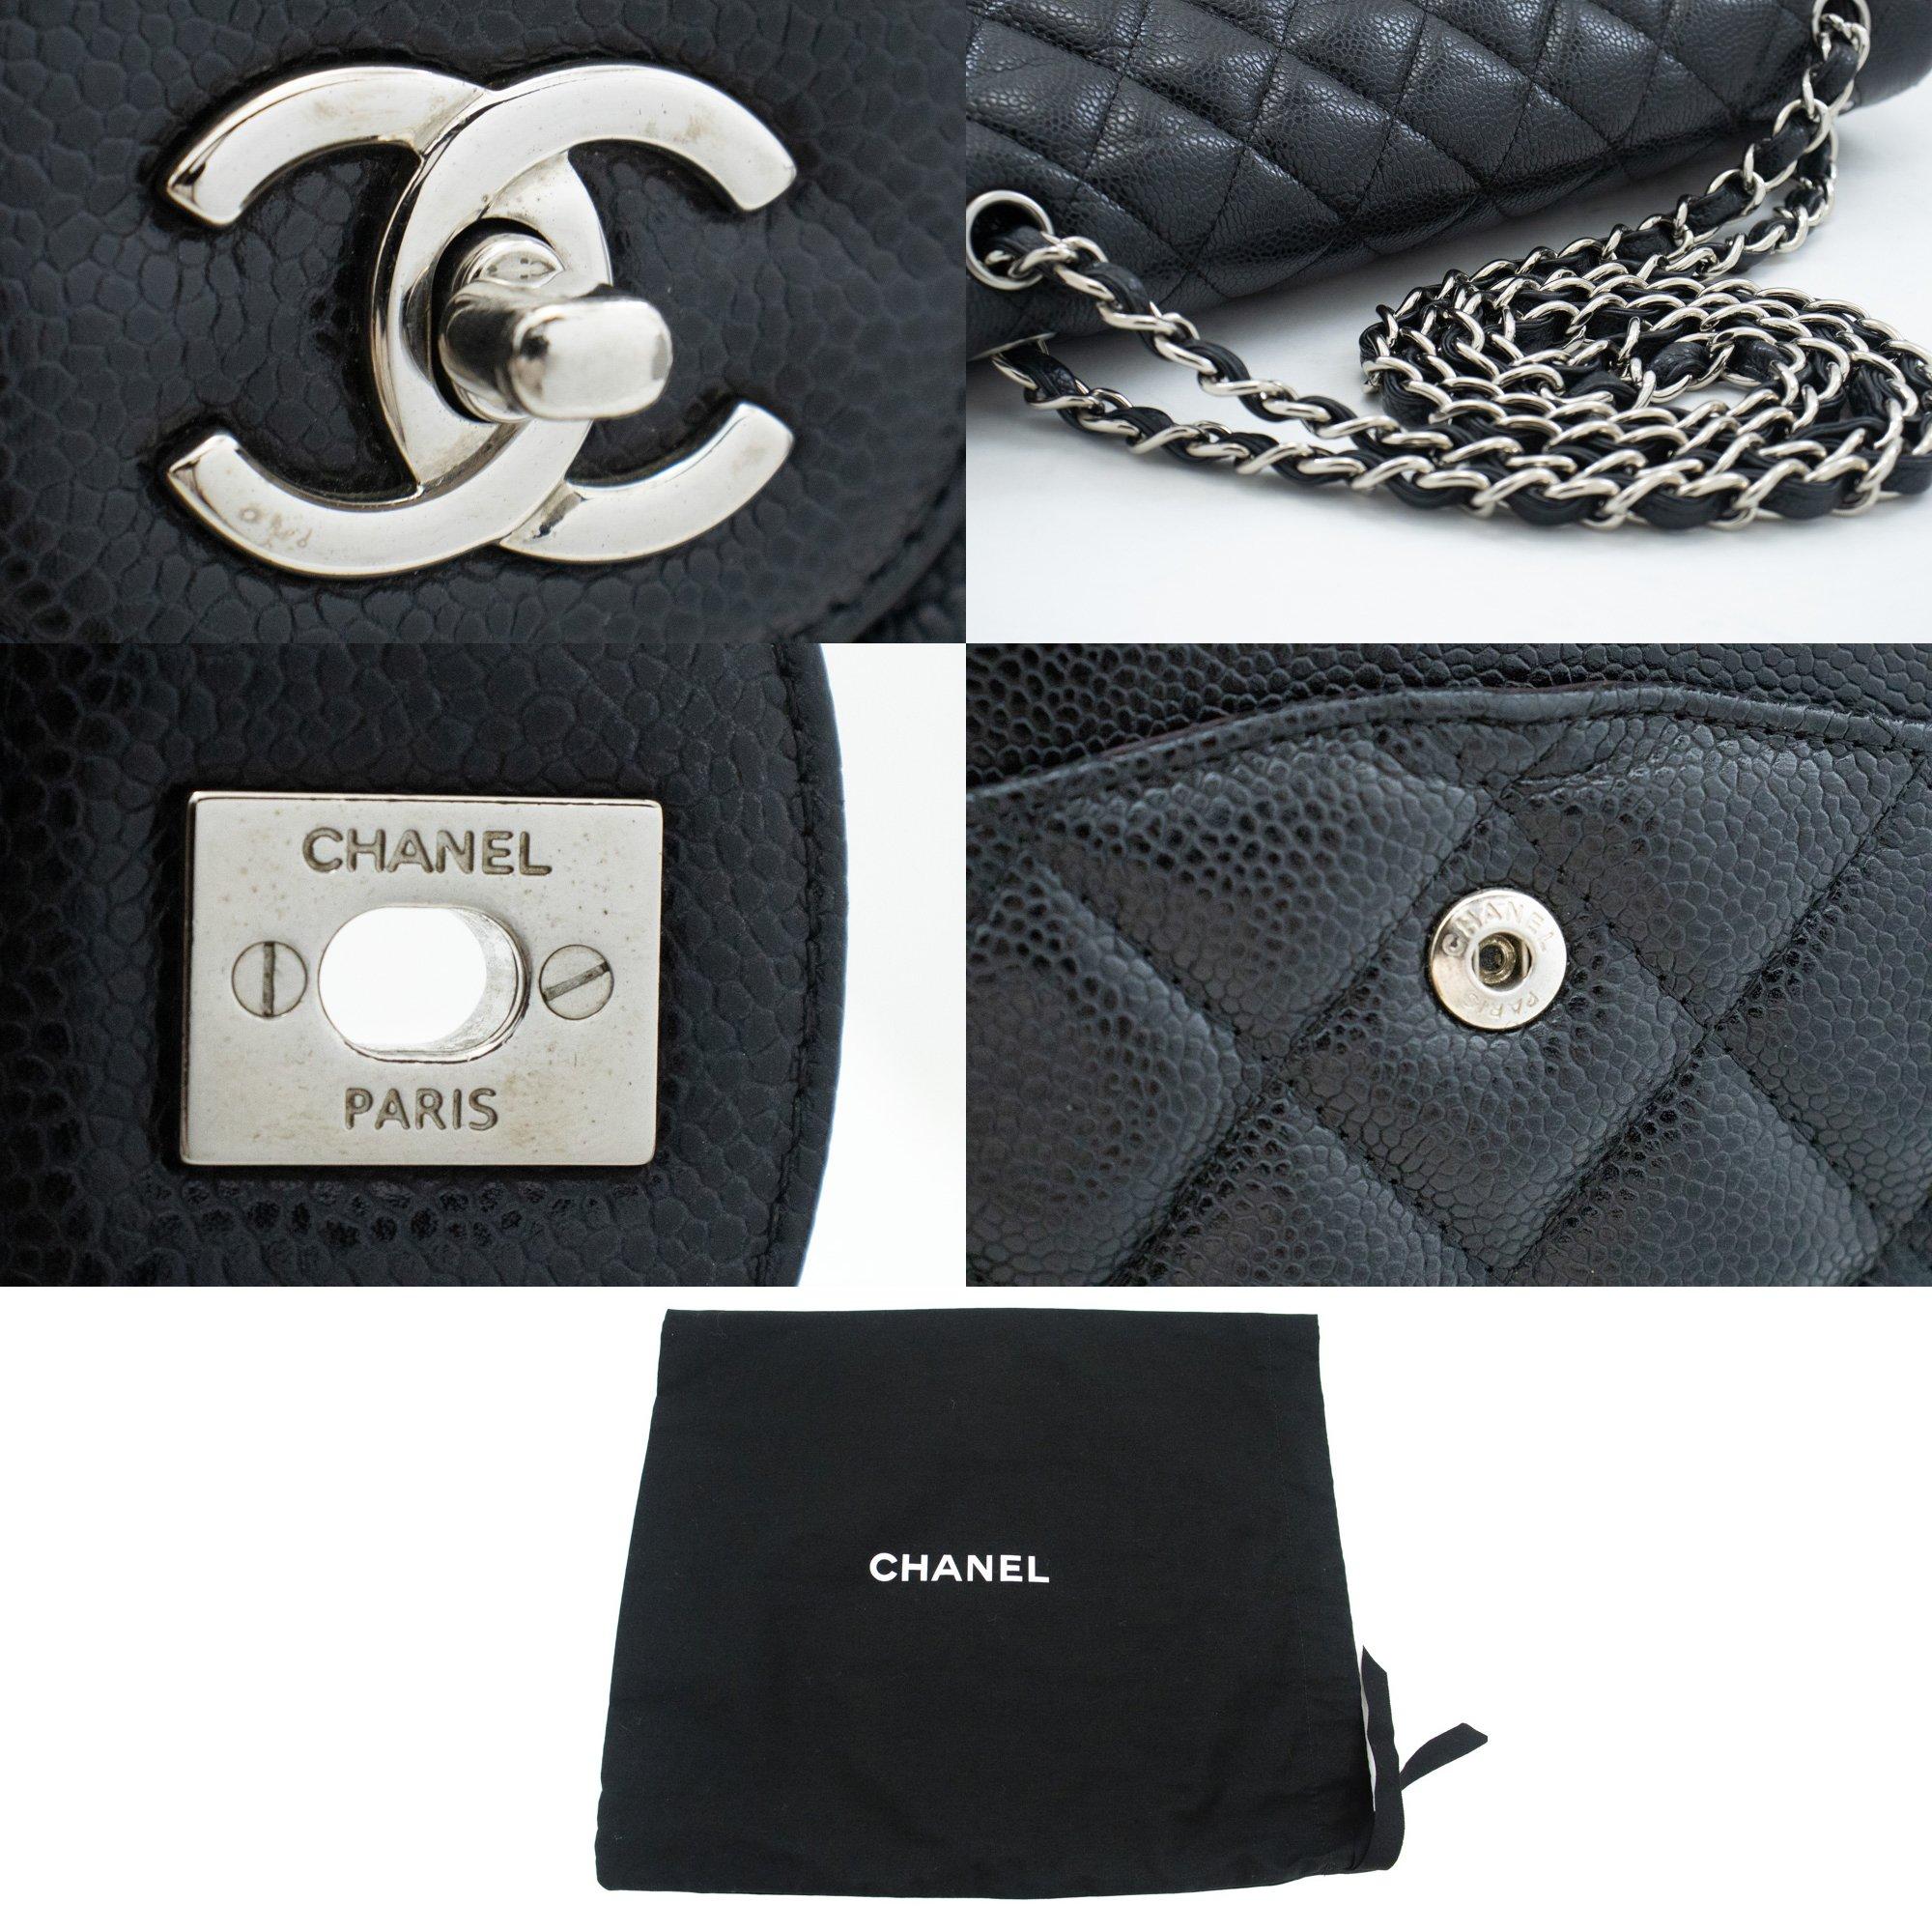 CHANEL Grained Calfskin Large Chain Shoulder Bag W Flap SV Classic For Sale 3